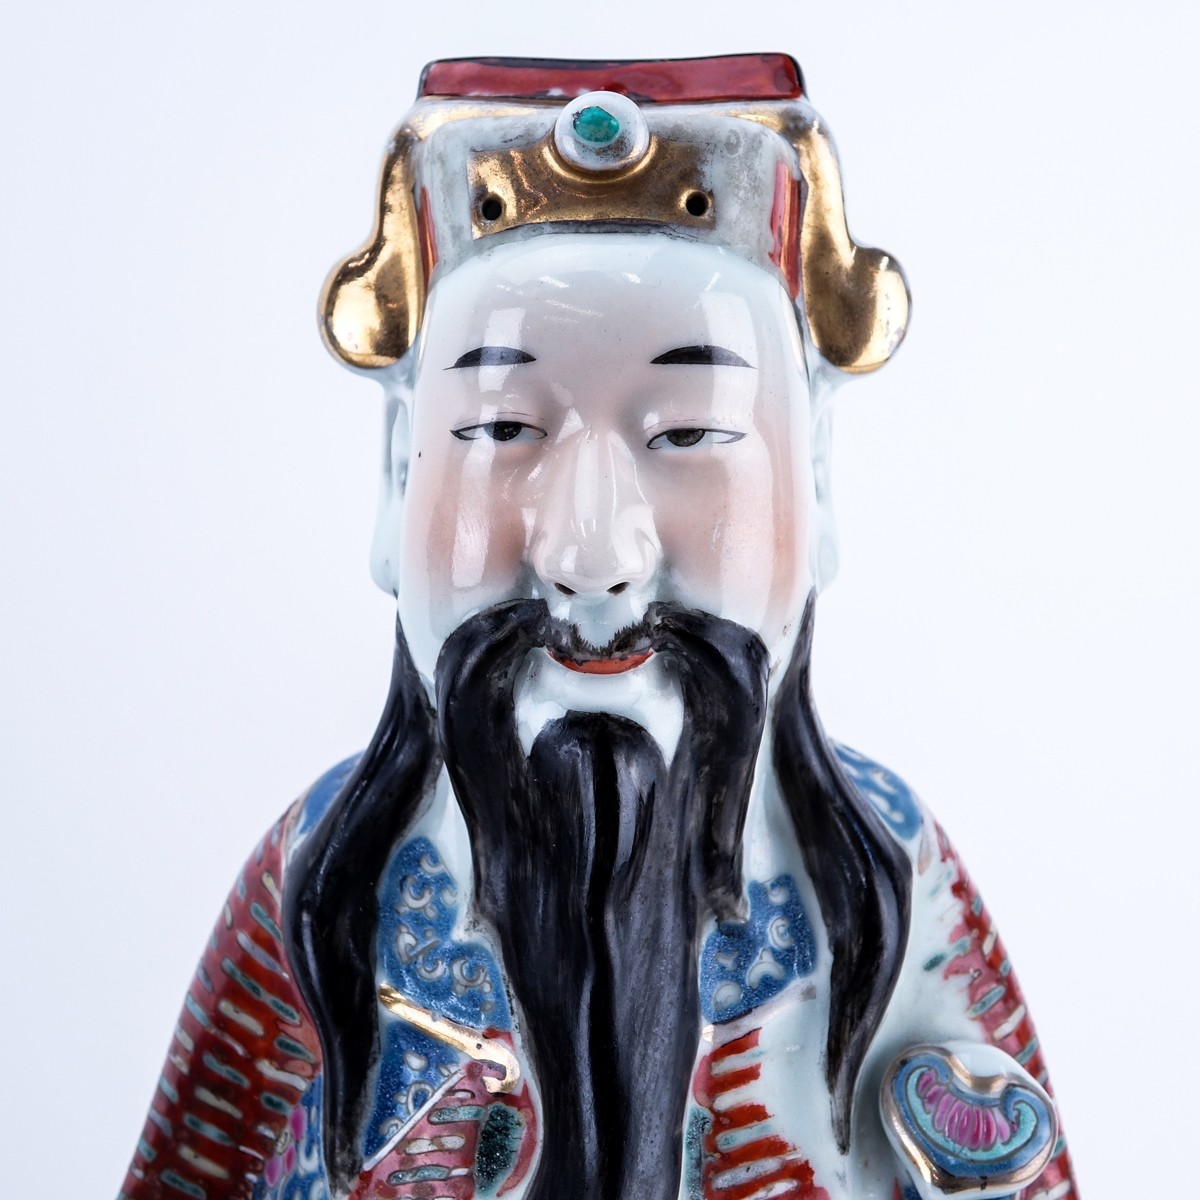 Three 20th C Chinese Porcelain Figures